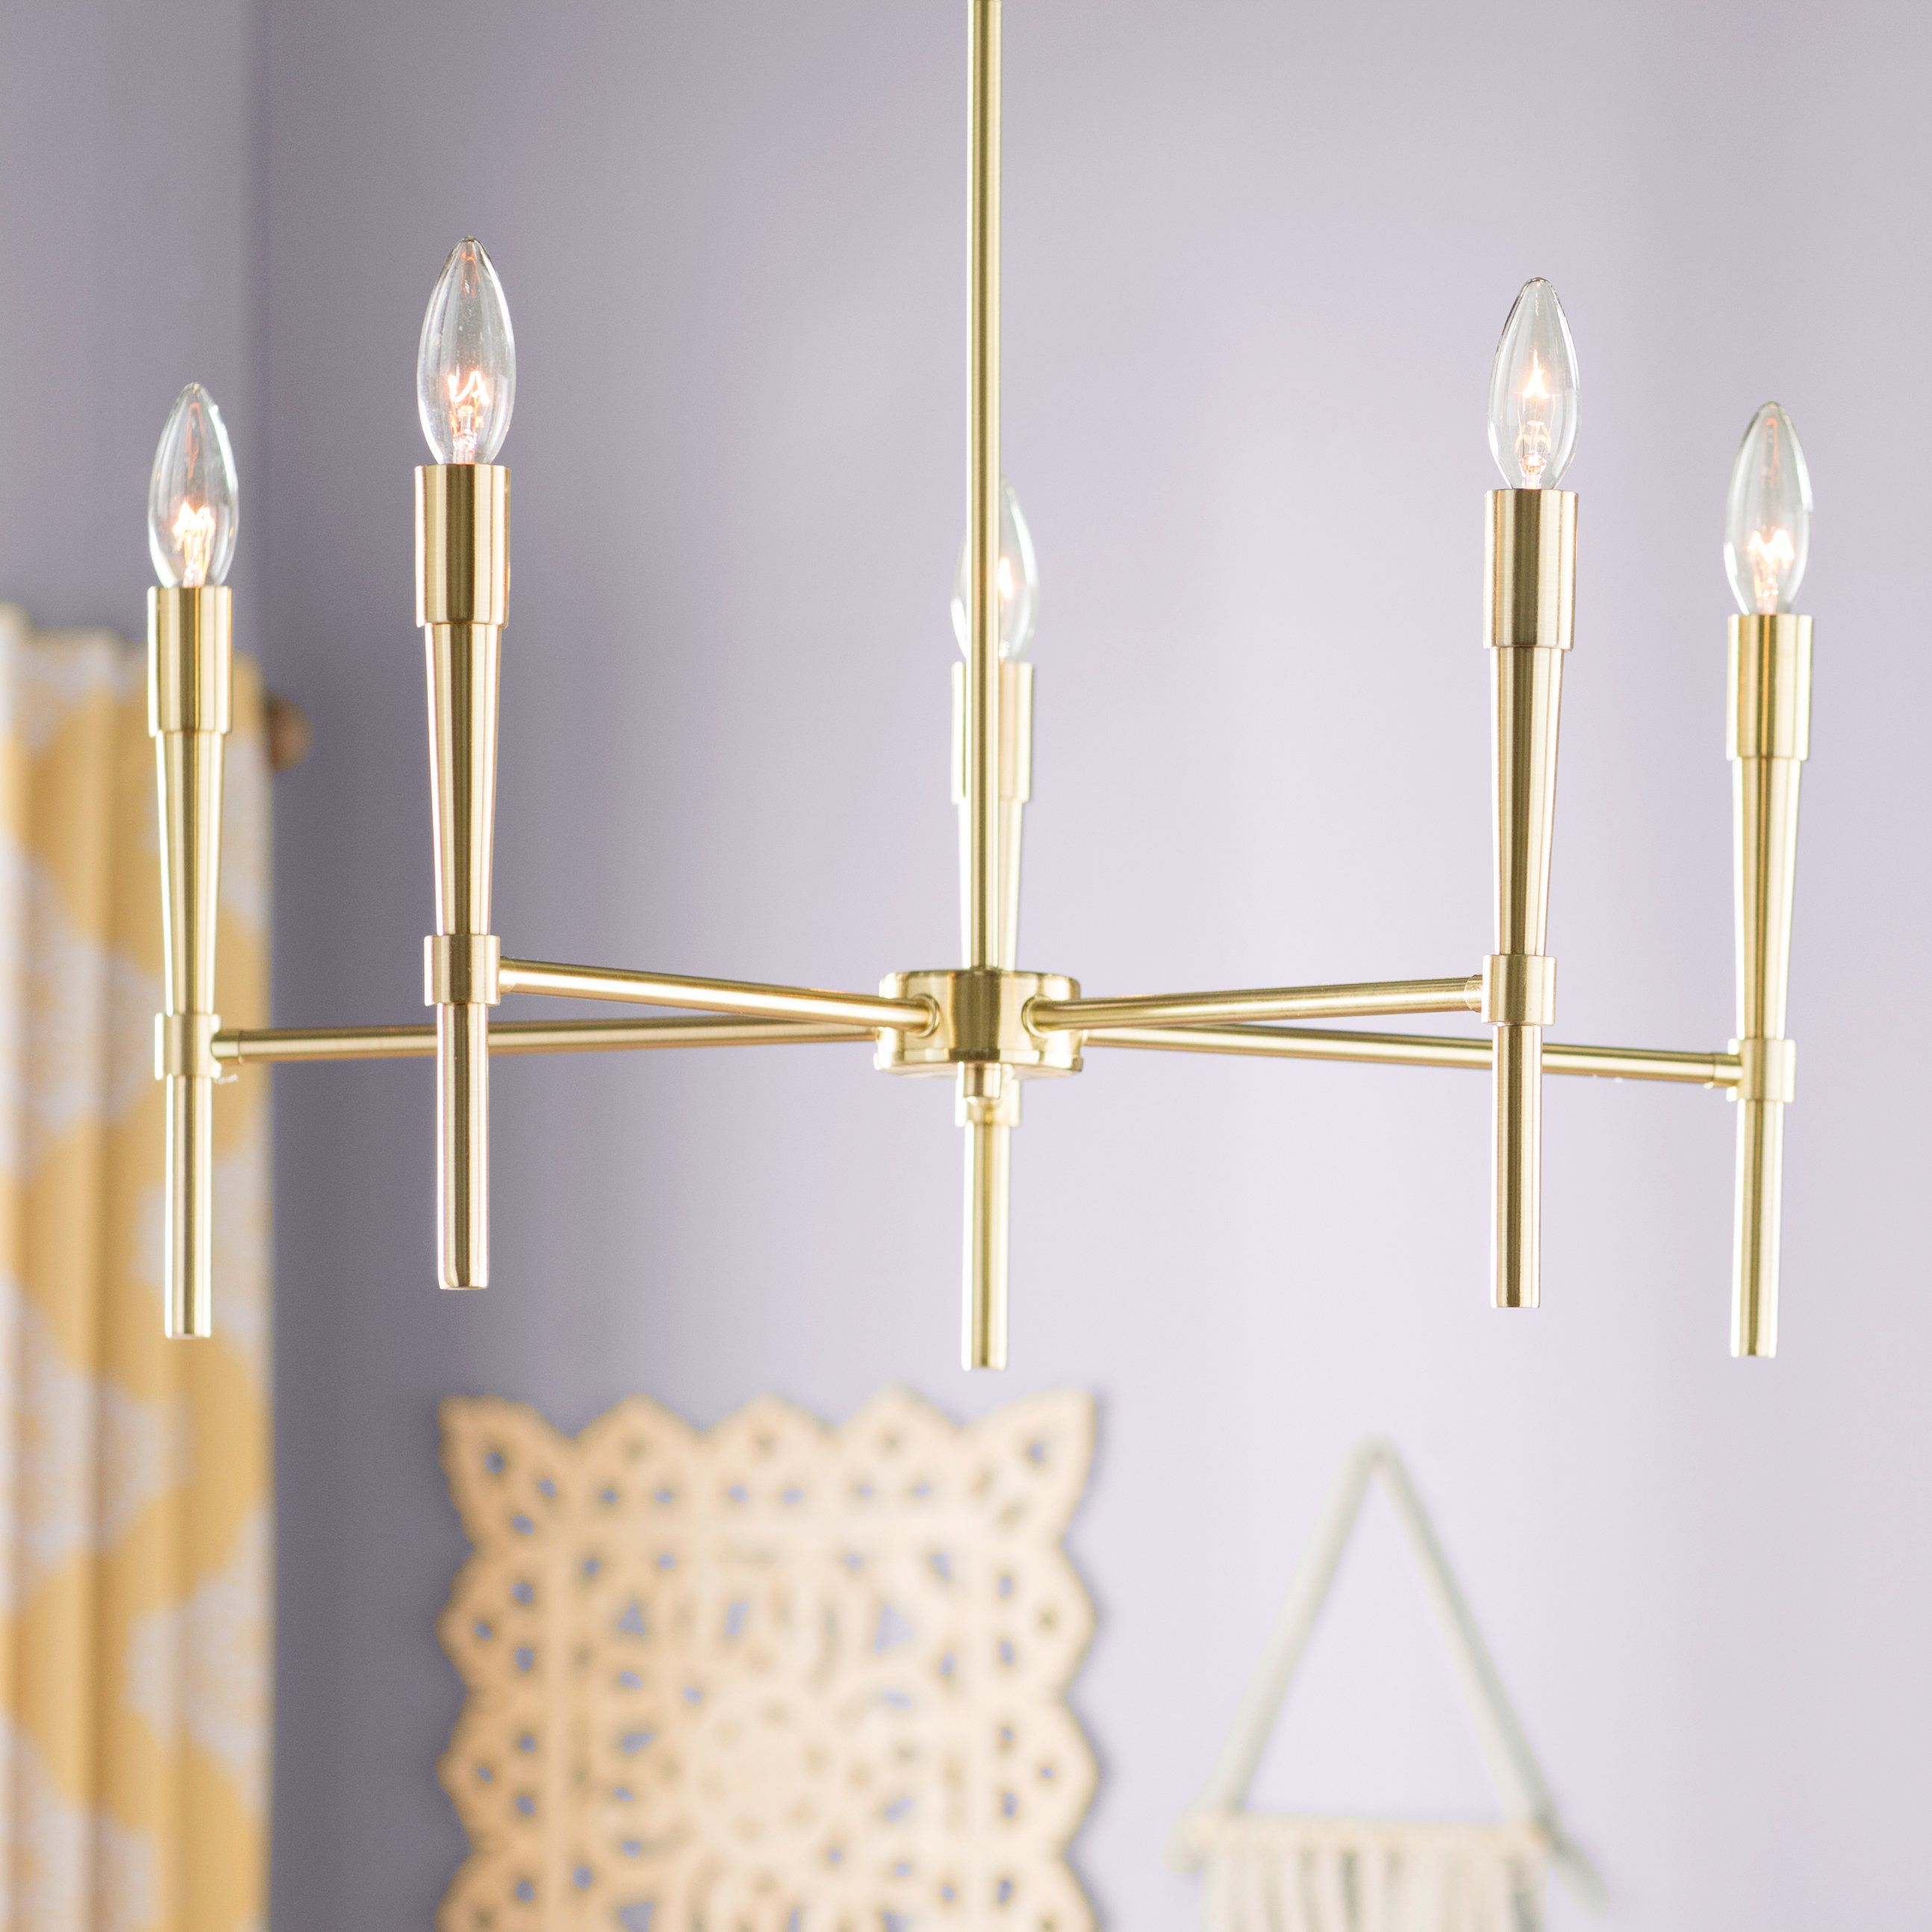 Ashleigh 5 Light Candle Style Chandelier With Regard To Tabit 5 Light Geometric Chandeliers (View 29 of 30)